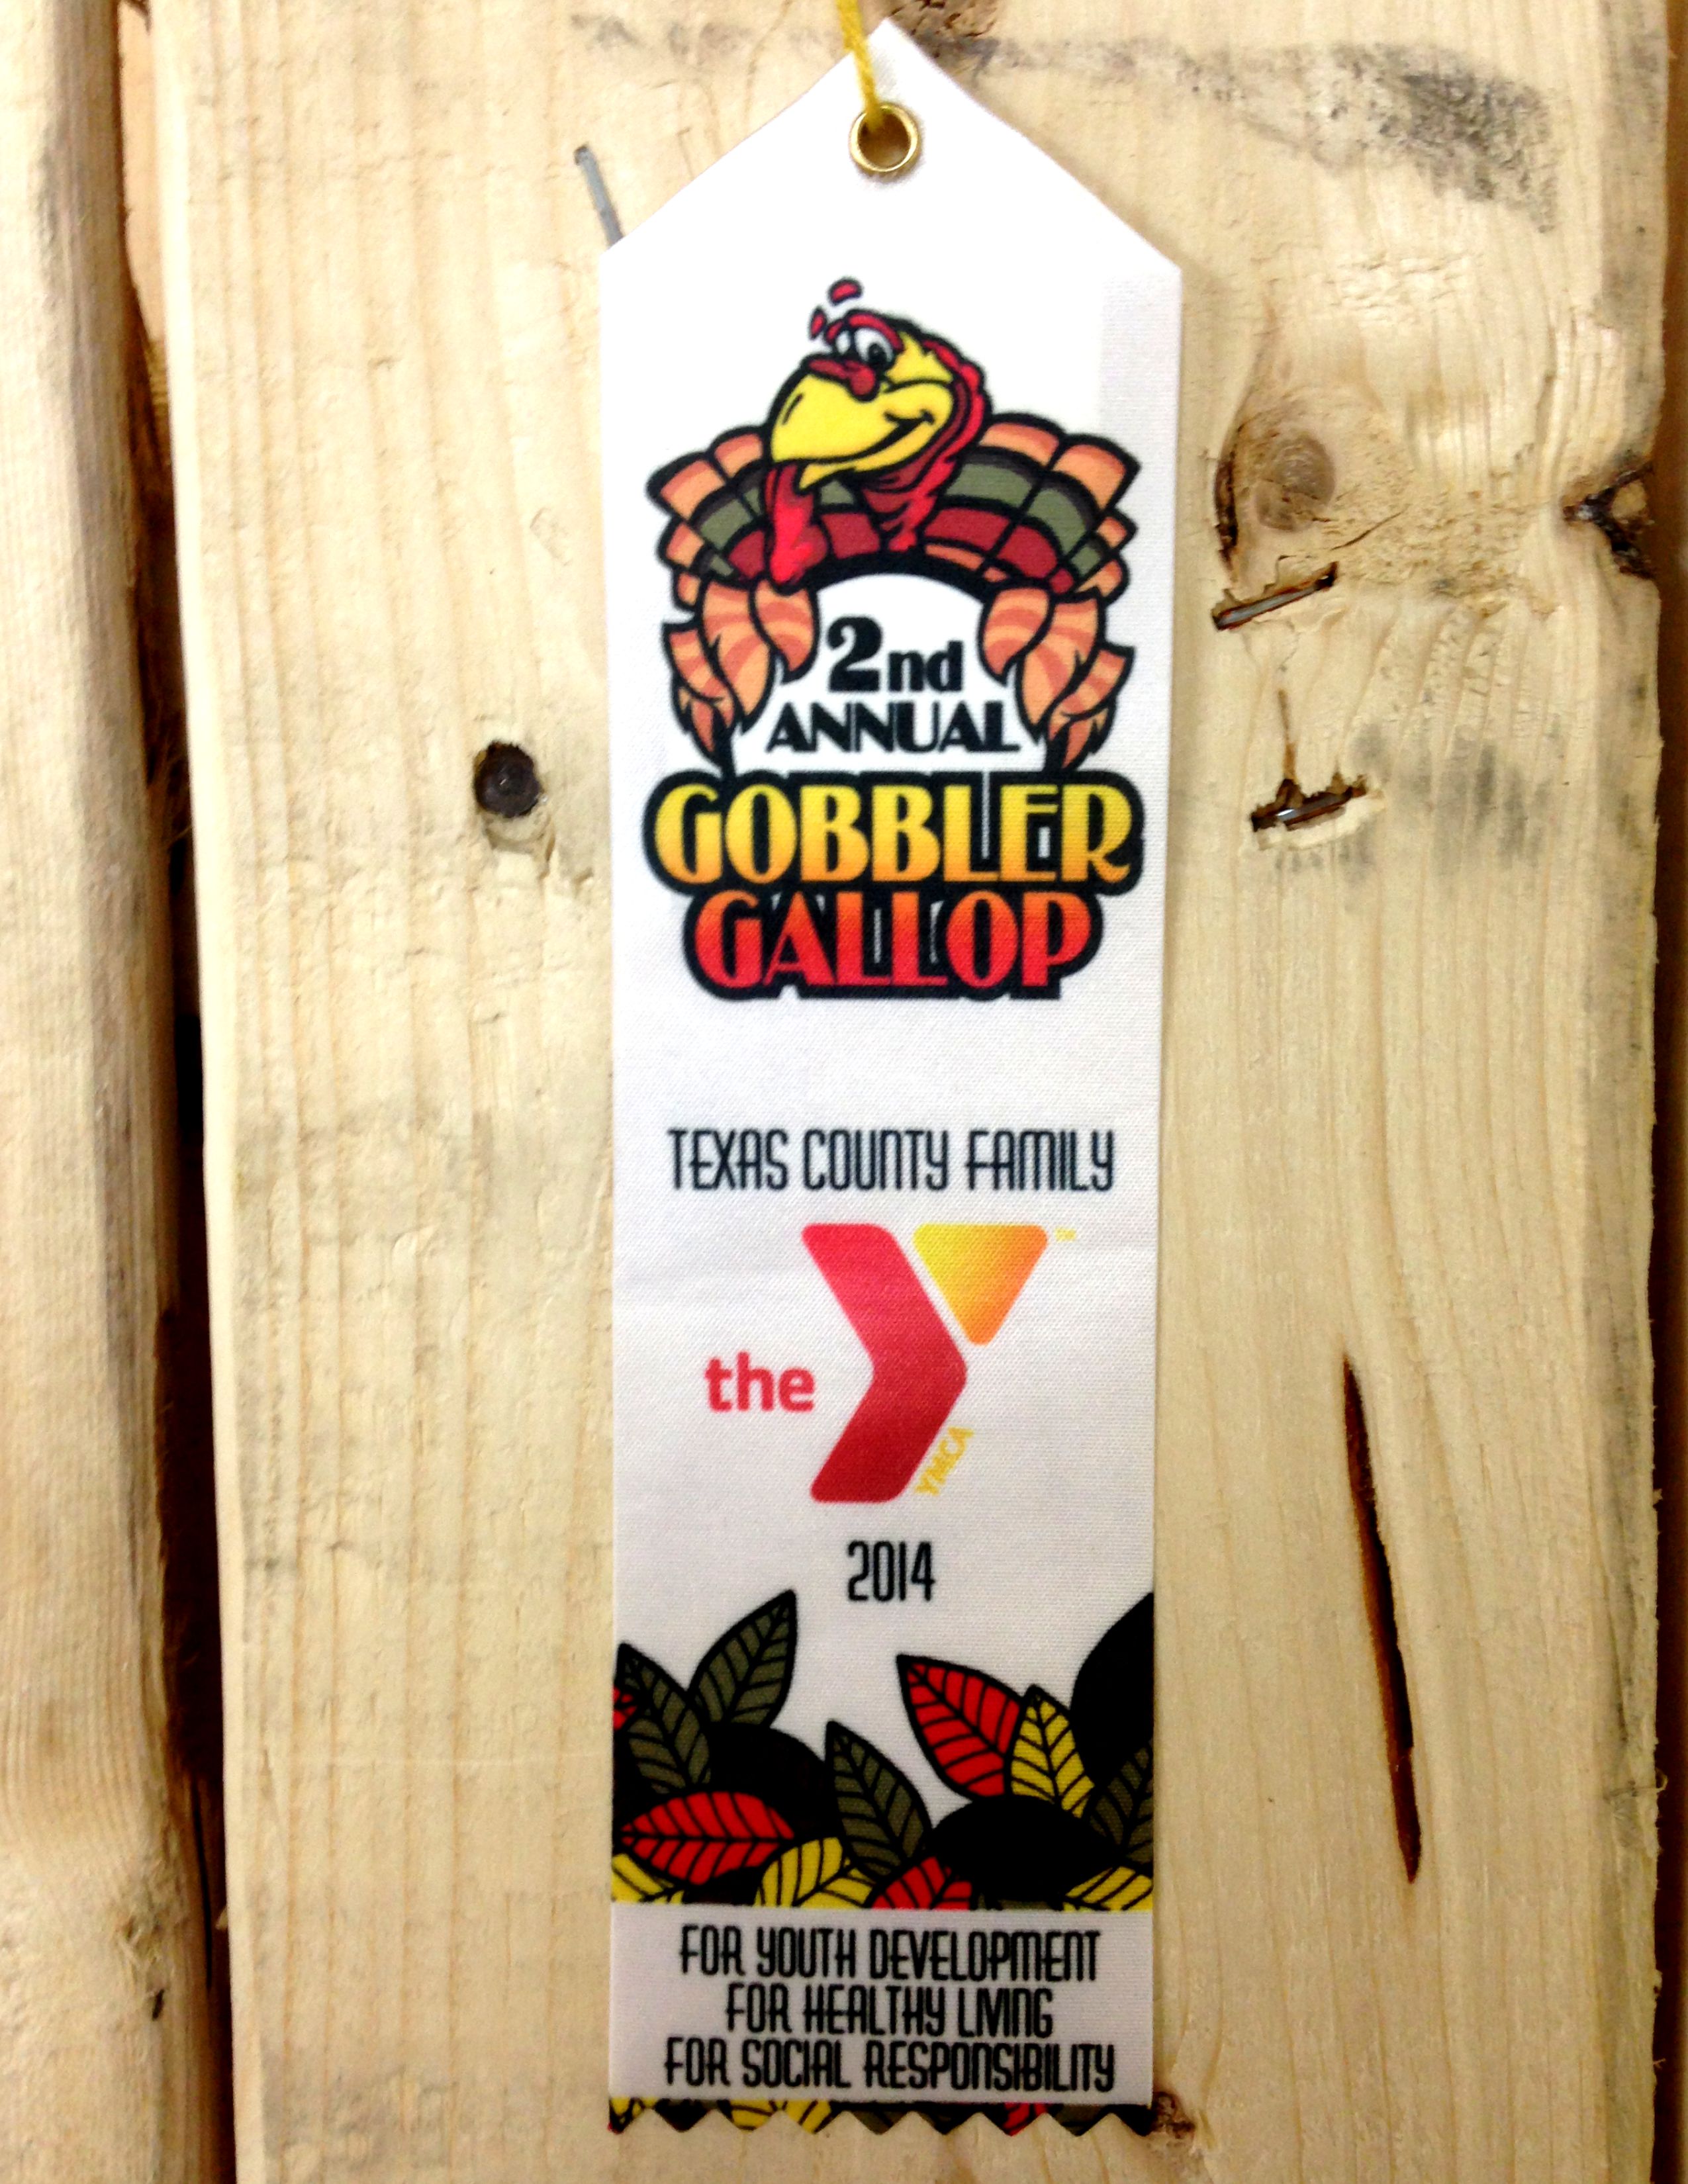 Gobbler Gallop made with sublimation printing